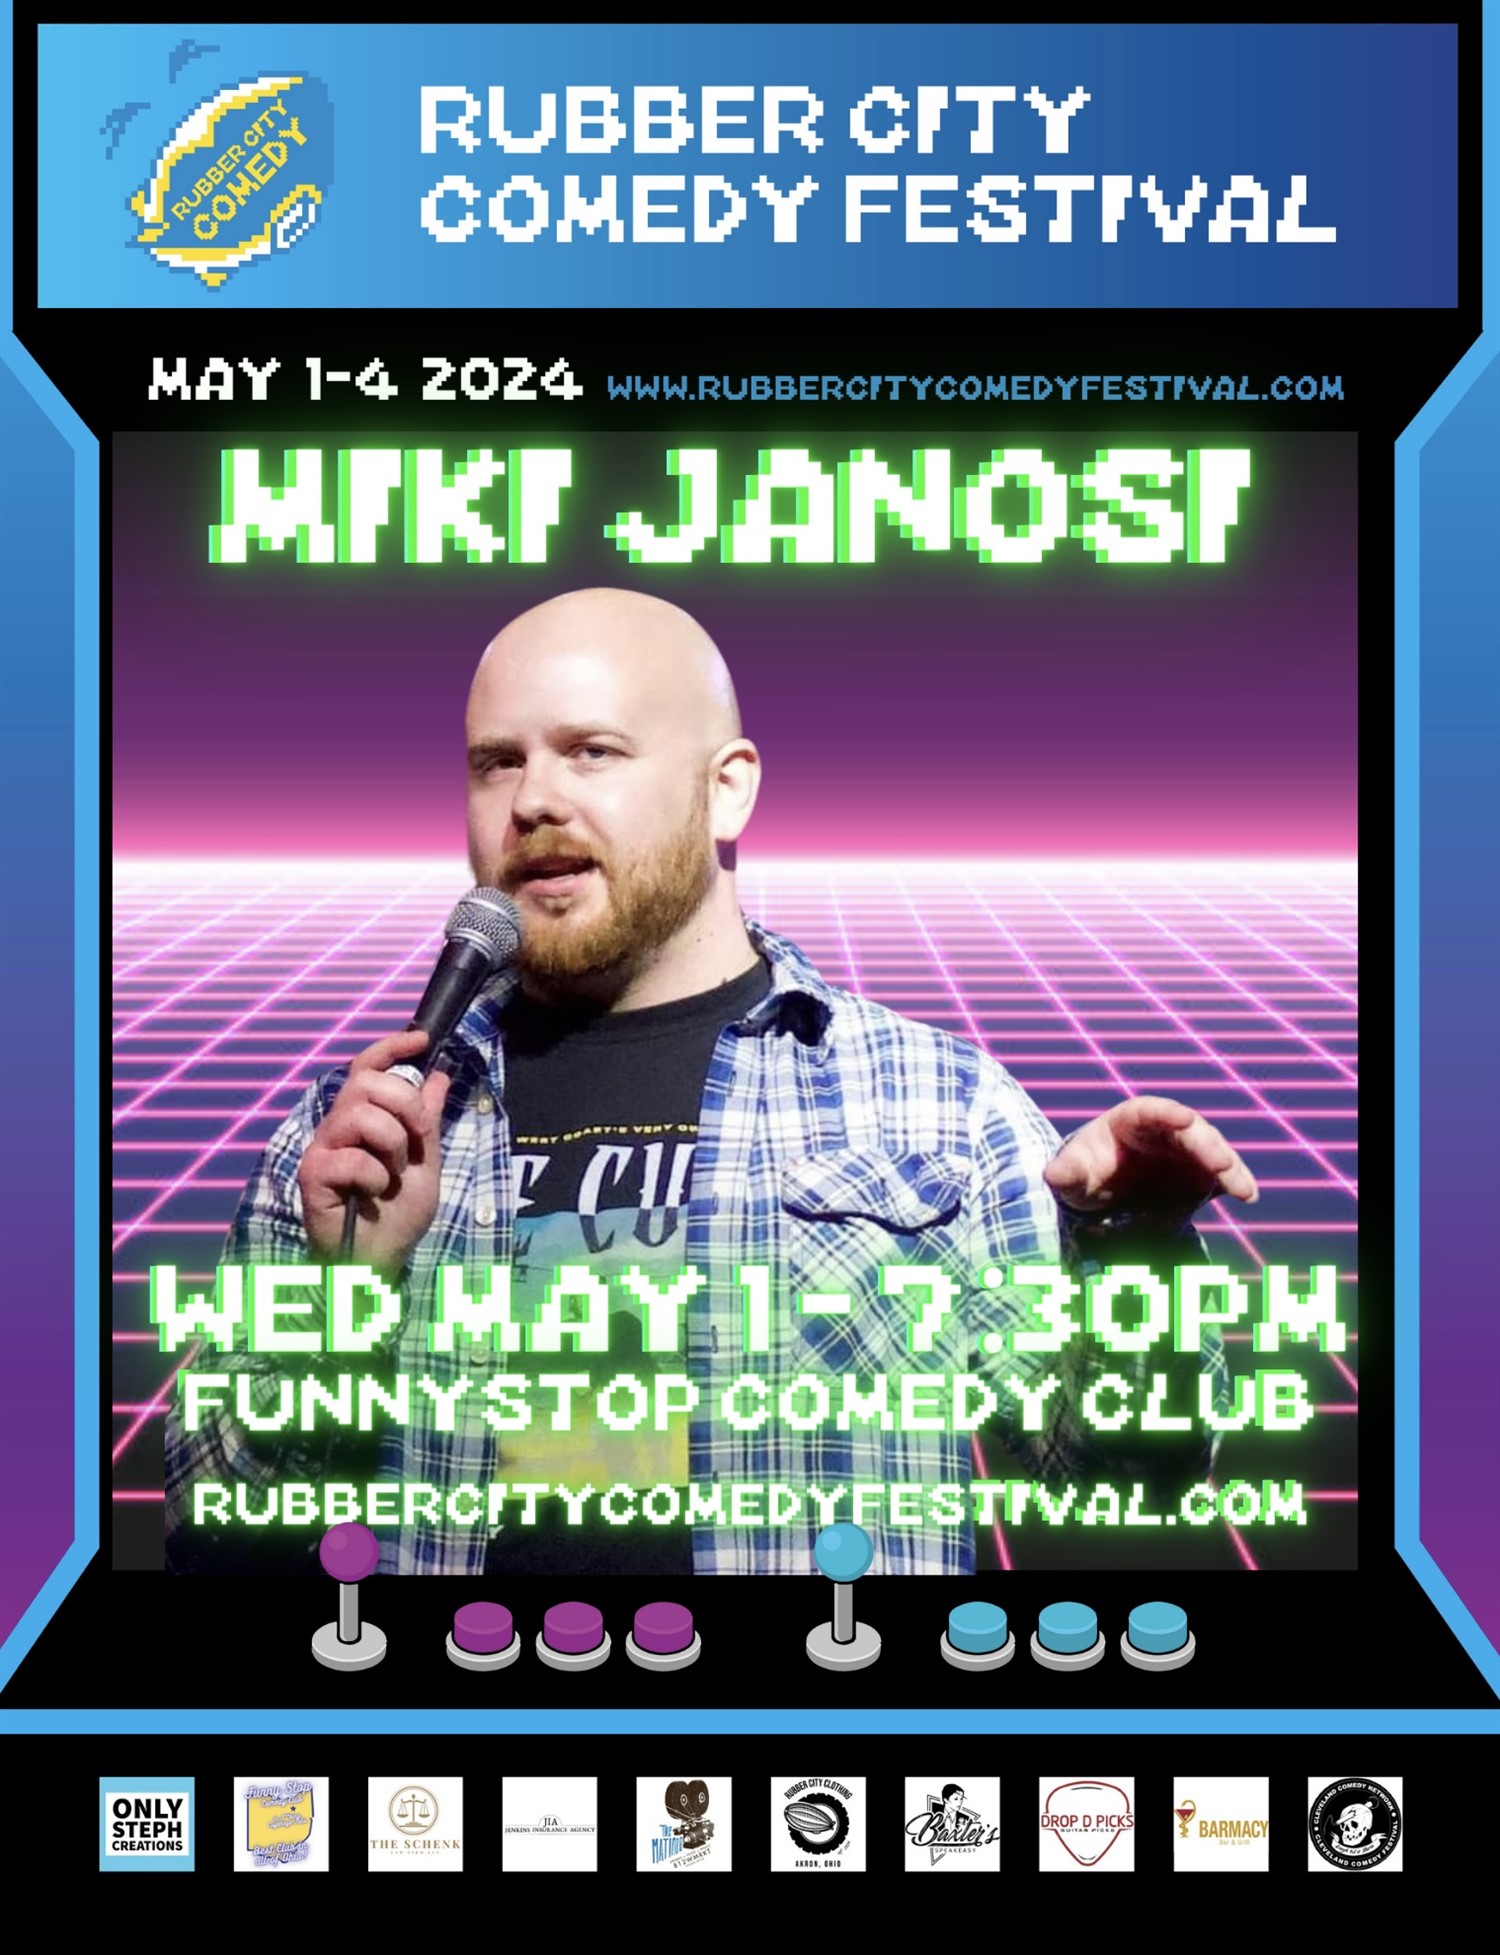 Miki Janosi Headlines for Rubber City Comedy Festival Funny Stop Comedy Club on May 01, 19:30@Funny Stop Comedy Club - Buy tickets and Get information on Funny Stop funnystop.online